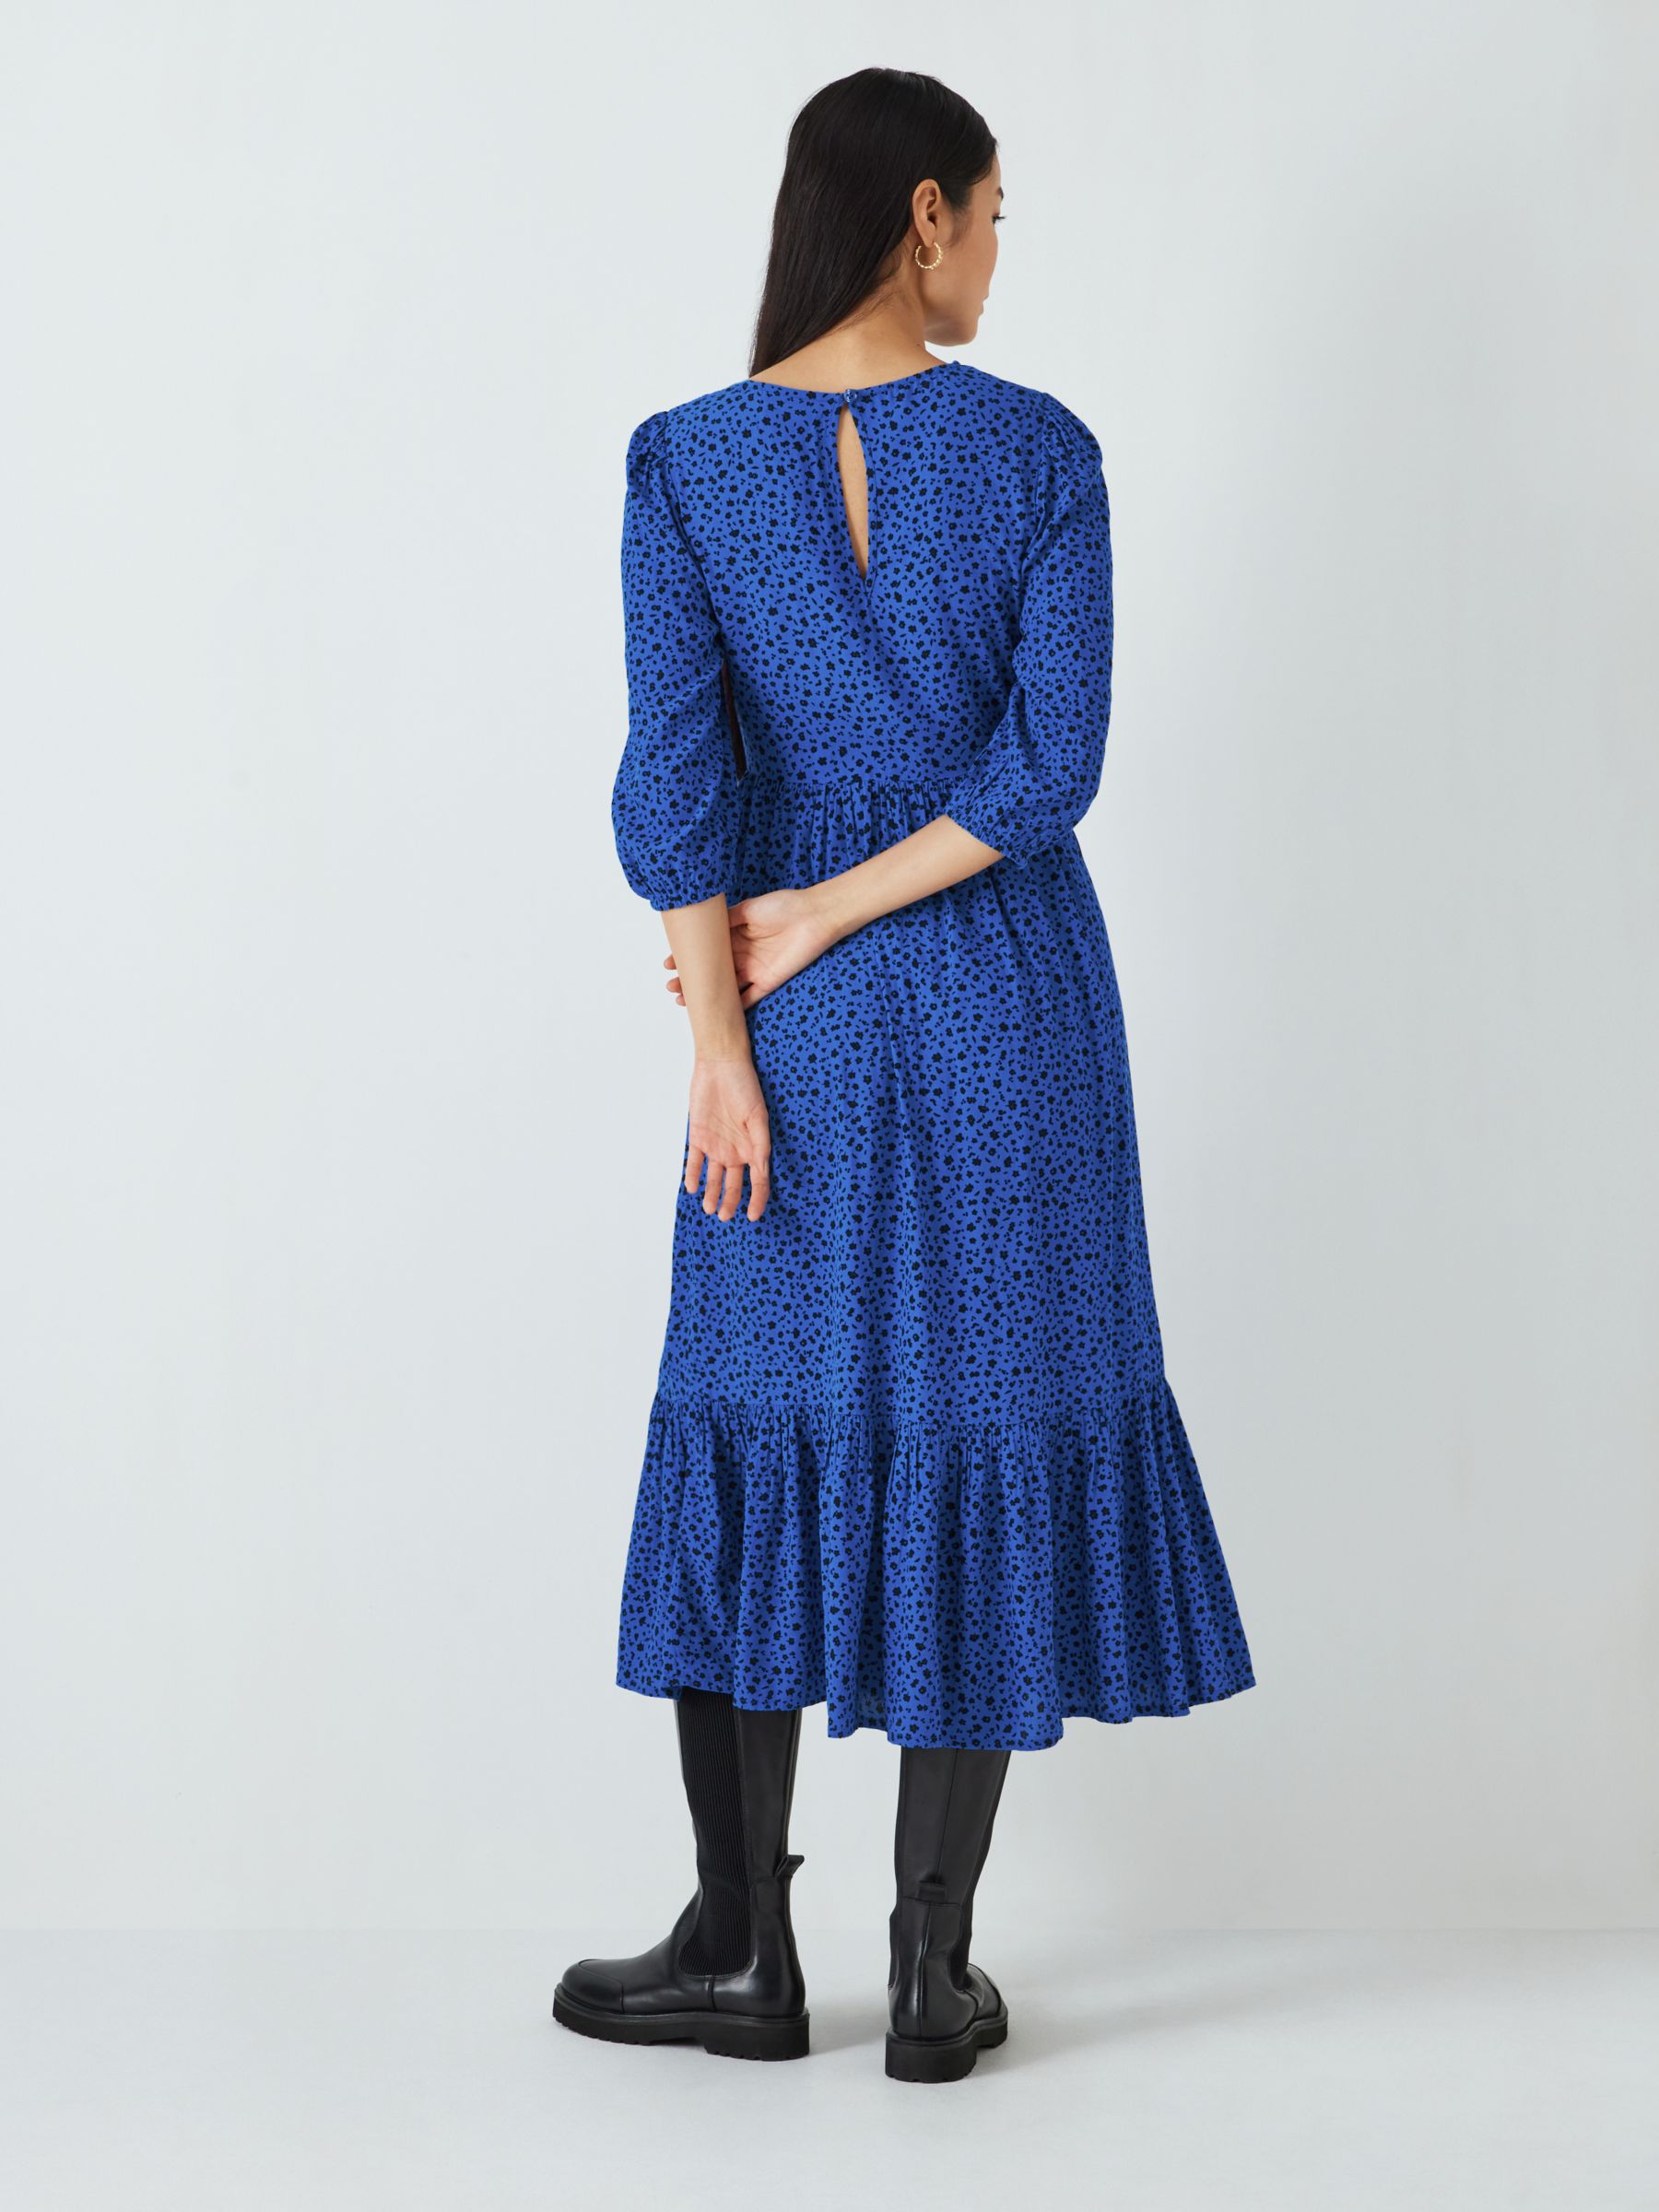 John Lewis ANYDAY Ditsy Floral Dress, Blue at John Lewis & Partners